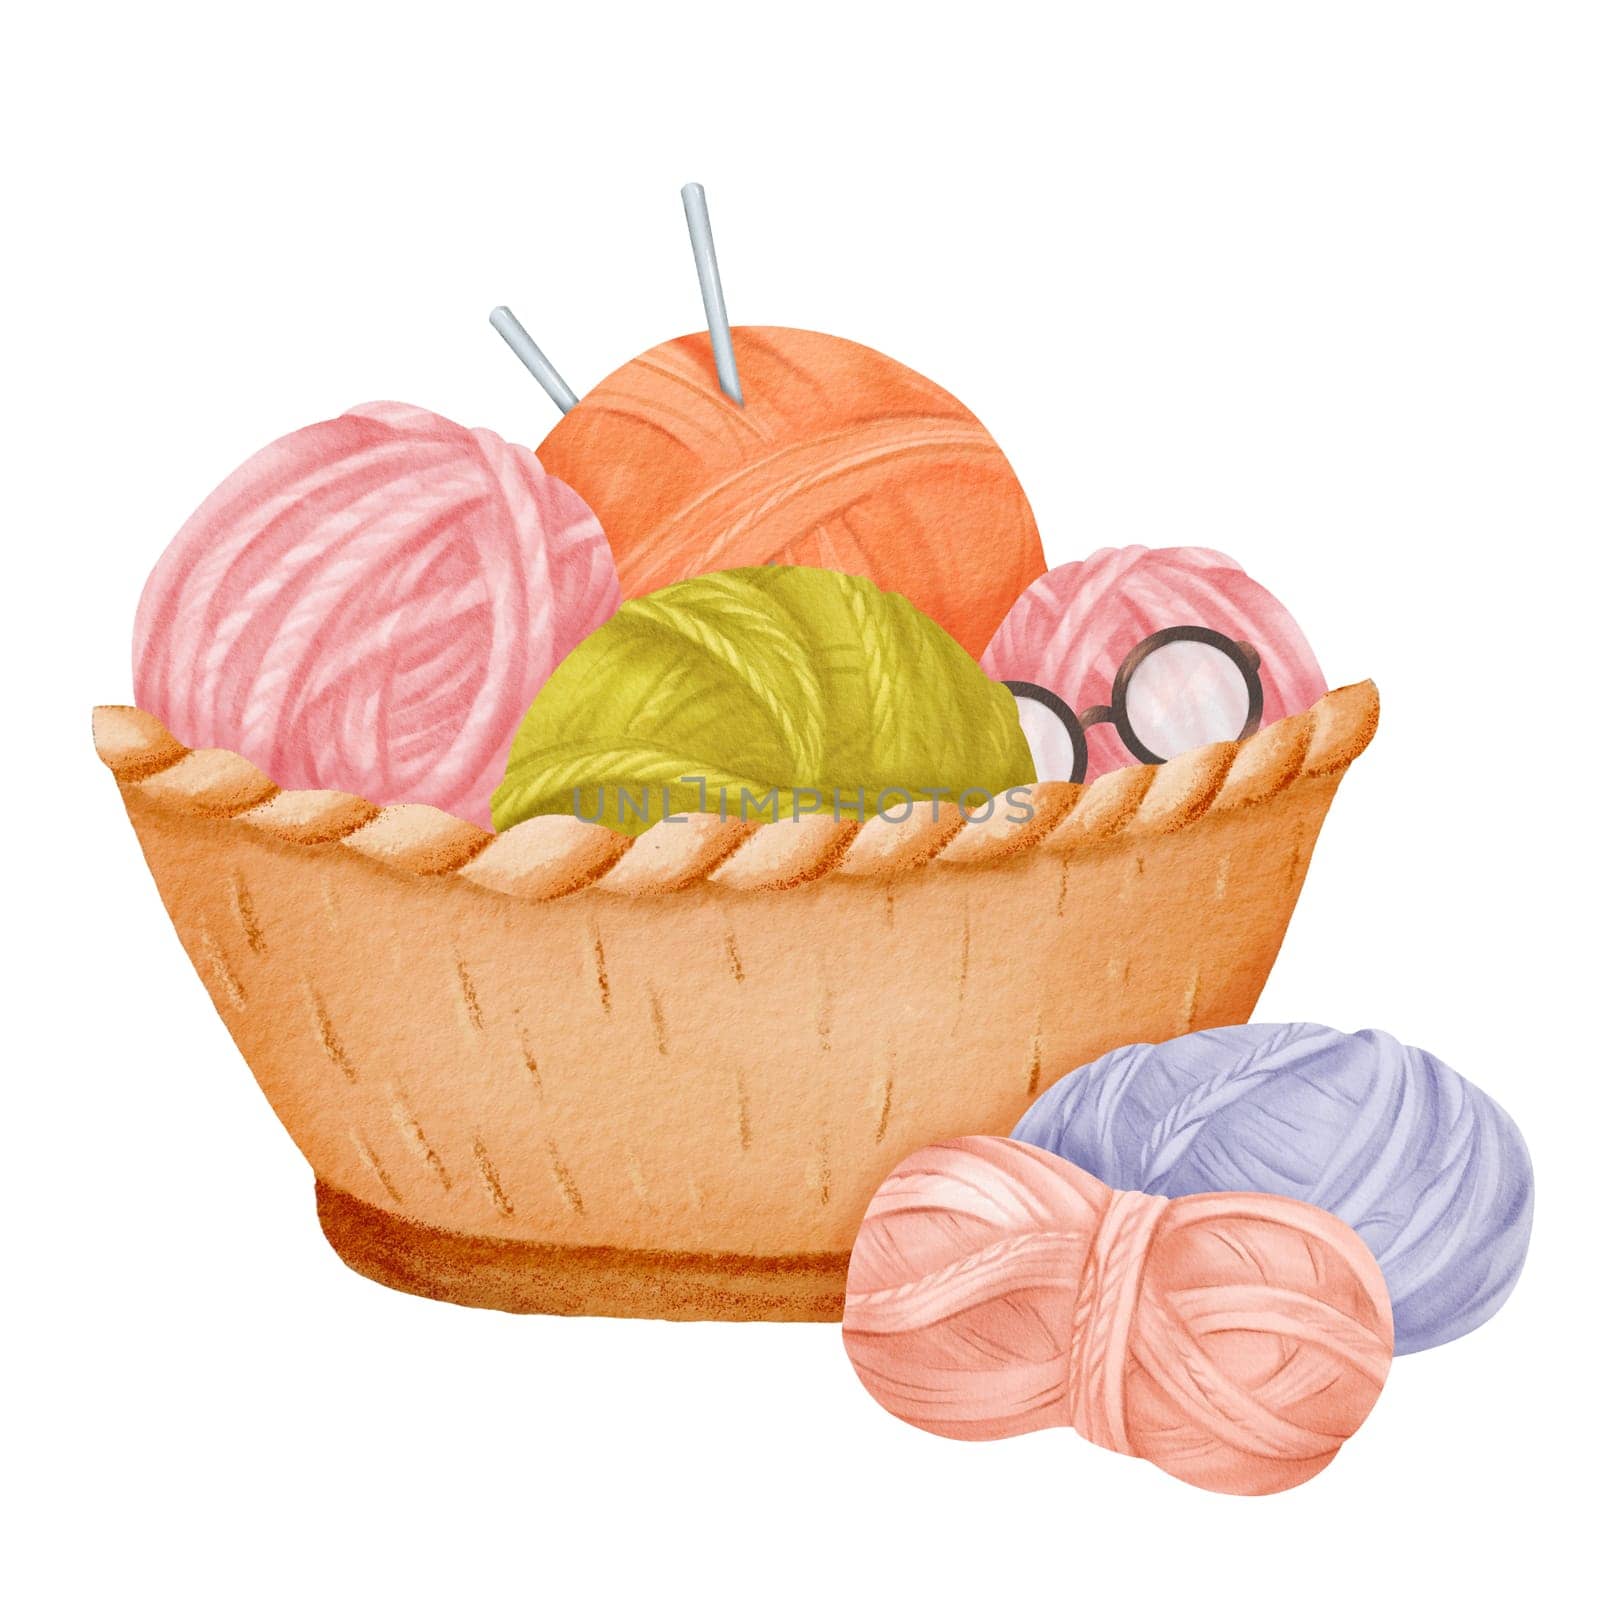 A cozy composition featuring a wicker basket filled with colorful yarn skeins, knitting needles, and glasses. for crafting enthusiasts, knitting blogs, or DIY designs. Watercolor illustration by Art_Mari_Ka